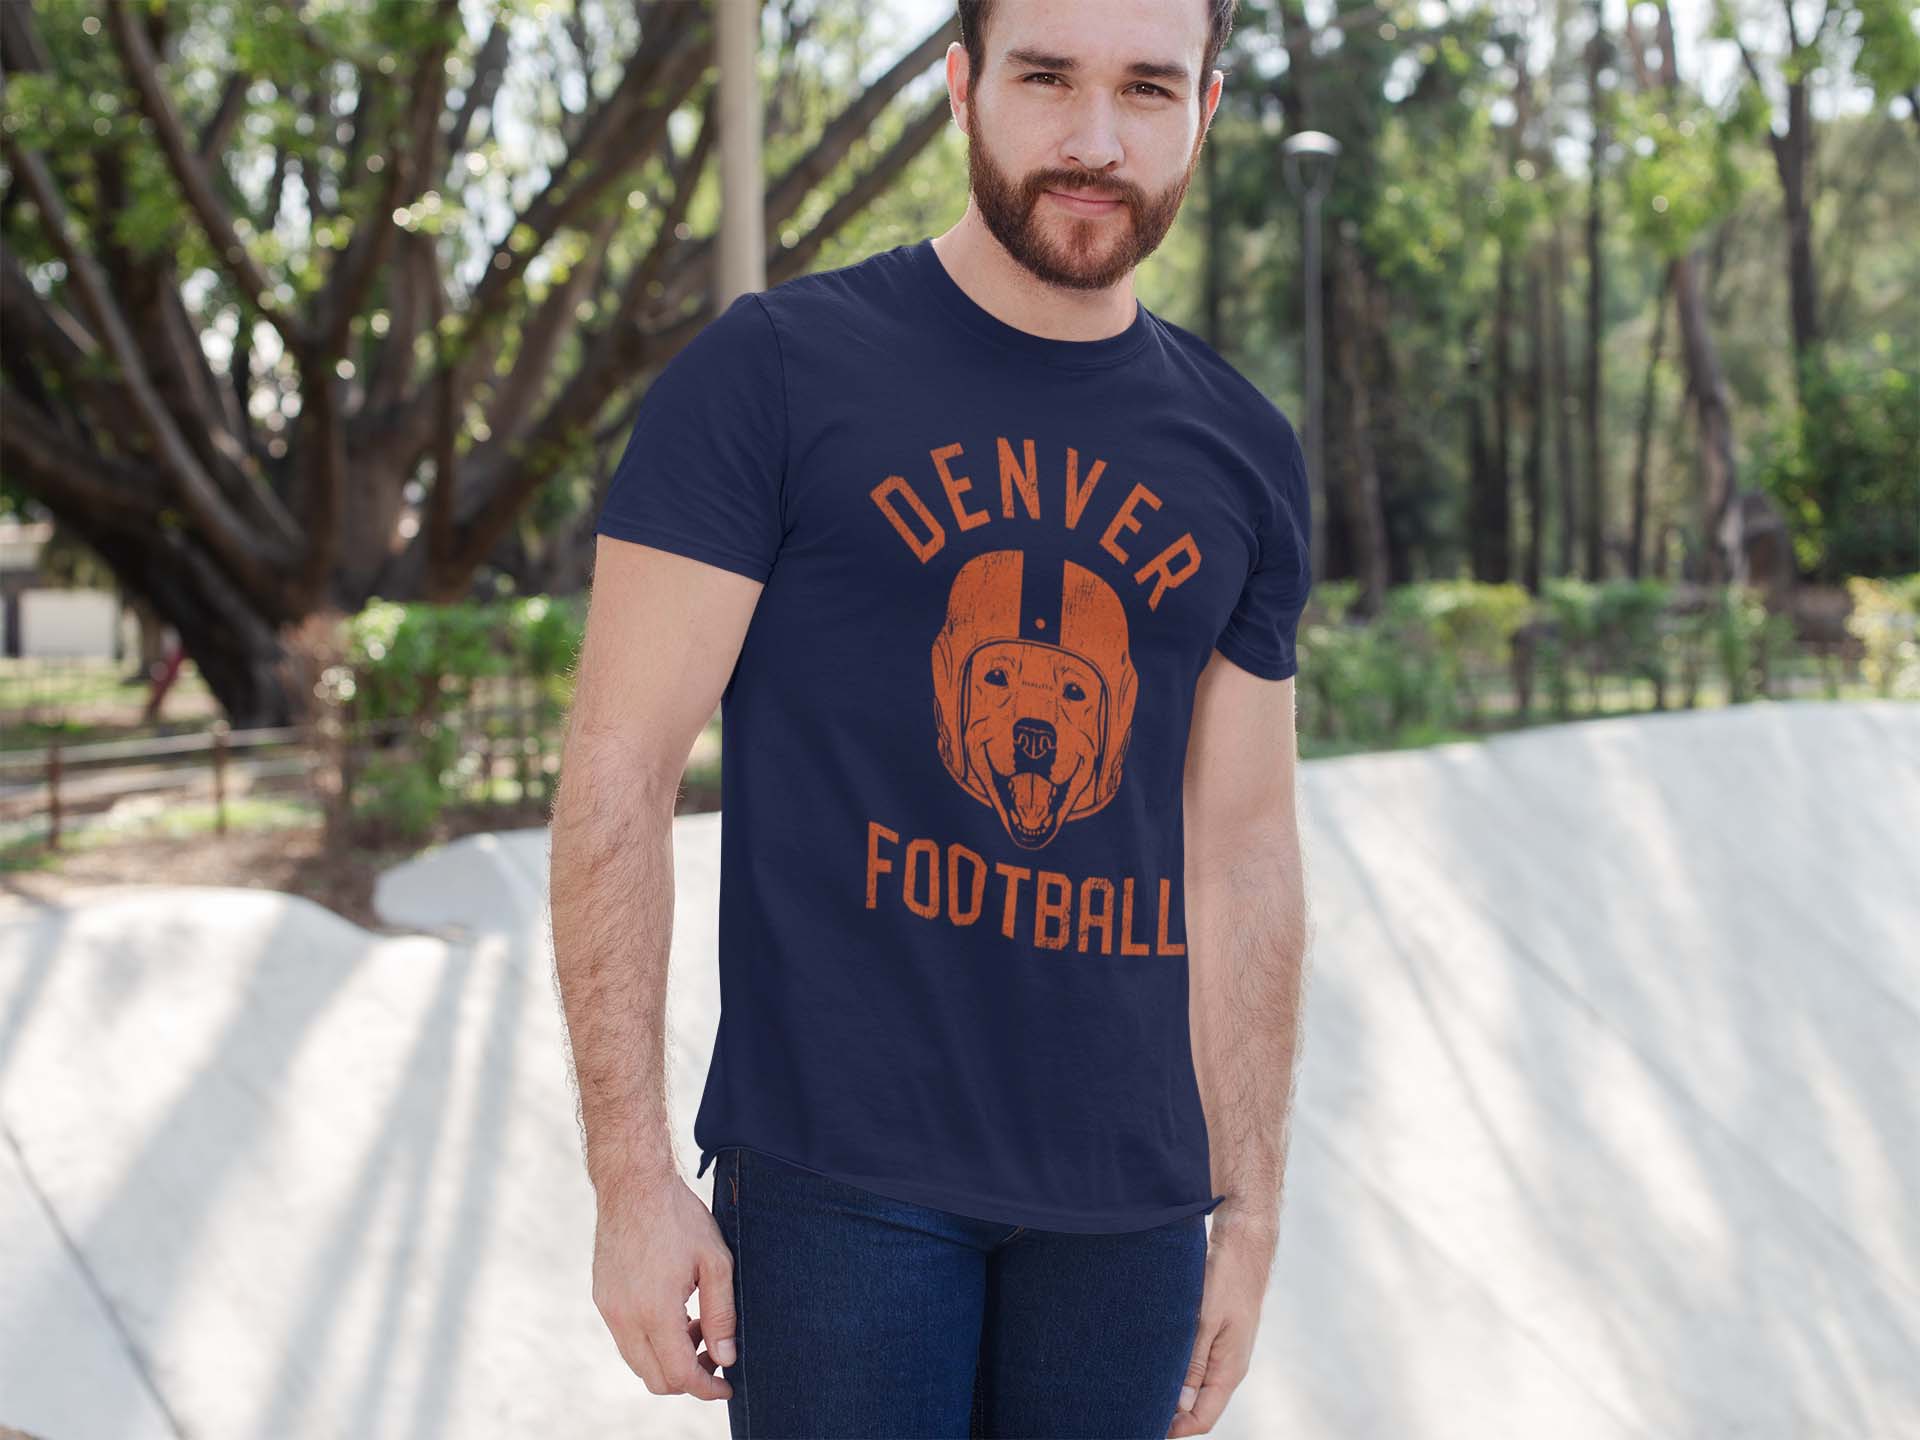 38REMI RELIEF/レミレリーフ DENVER FOOT BALL Tシャツ - Tシャツ 